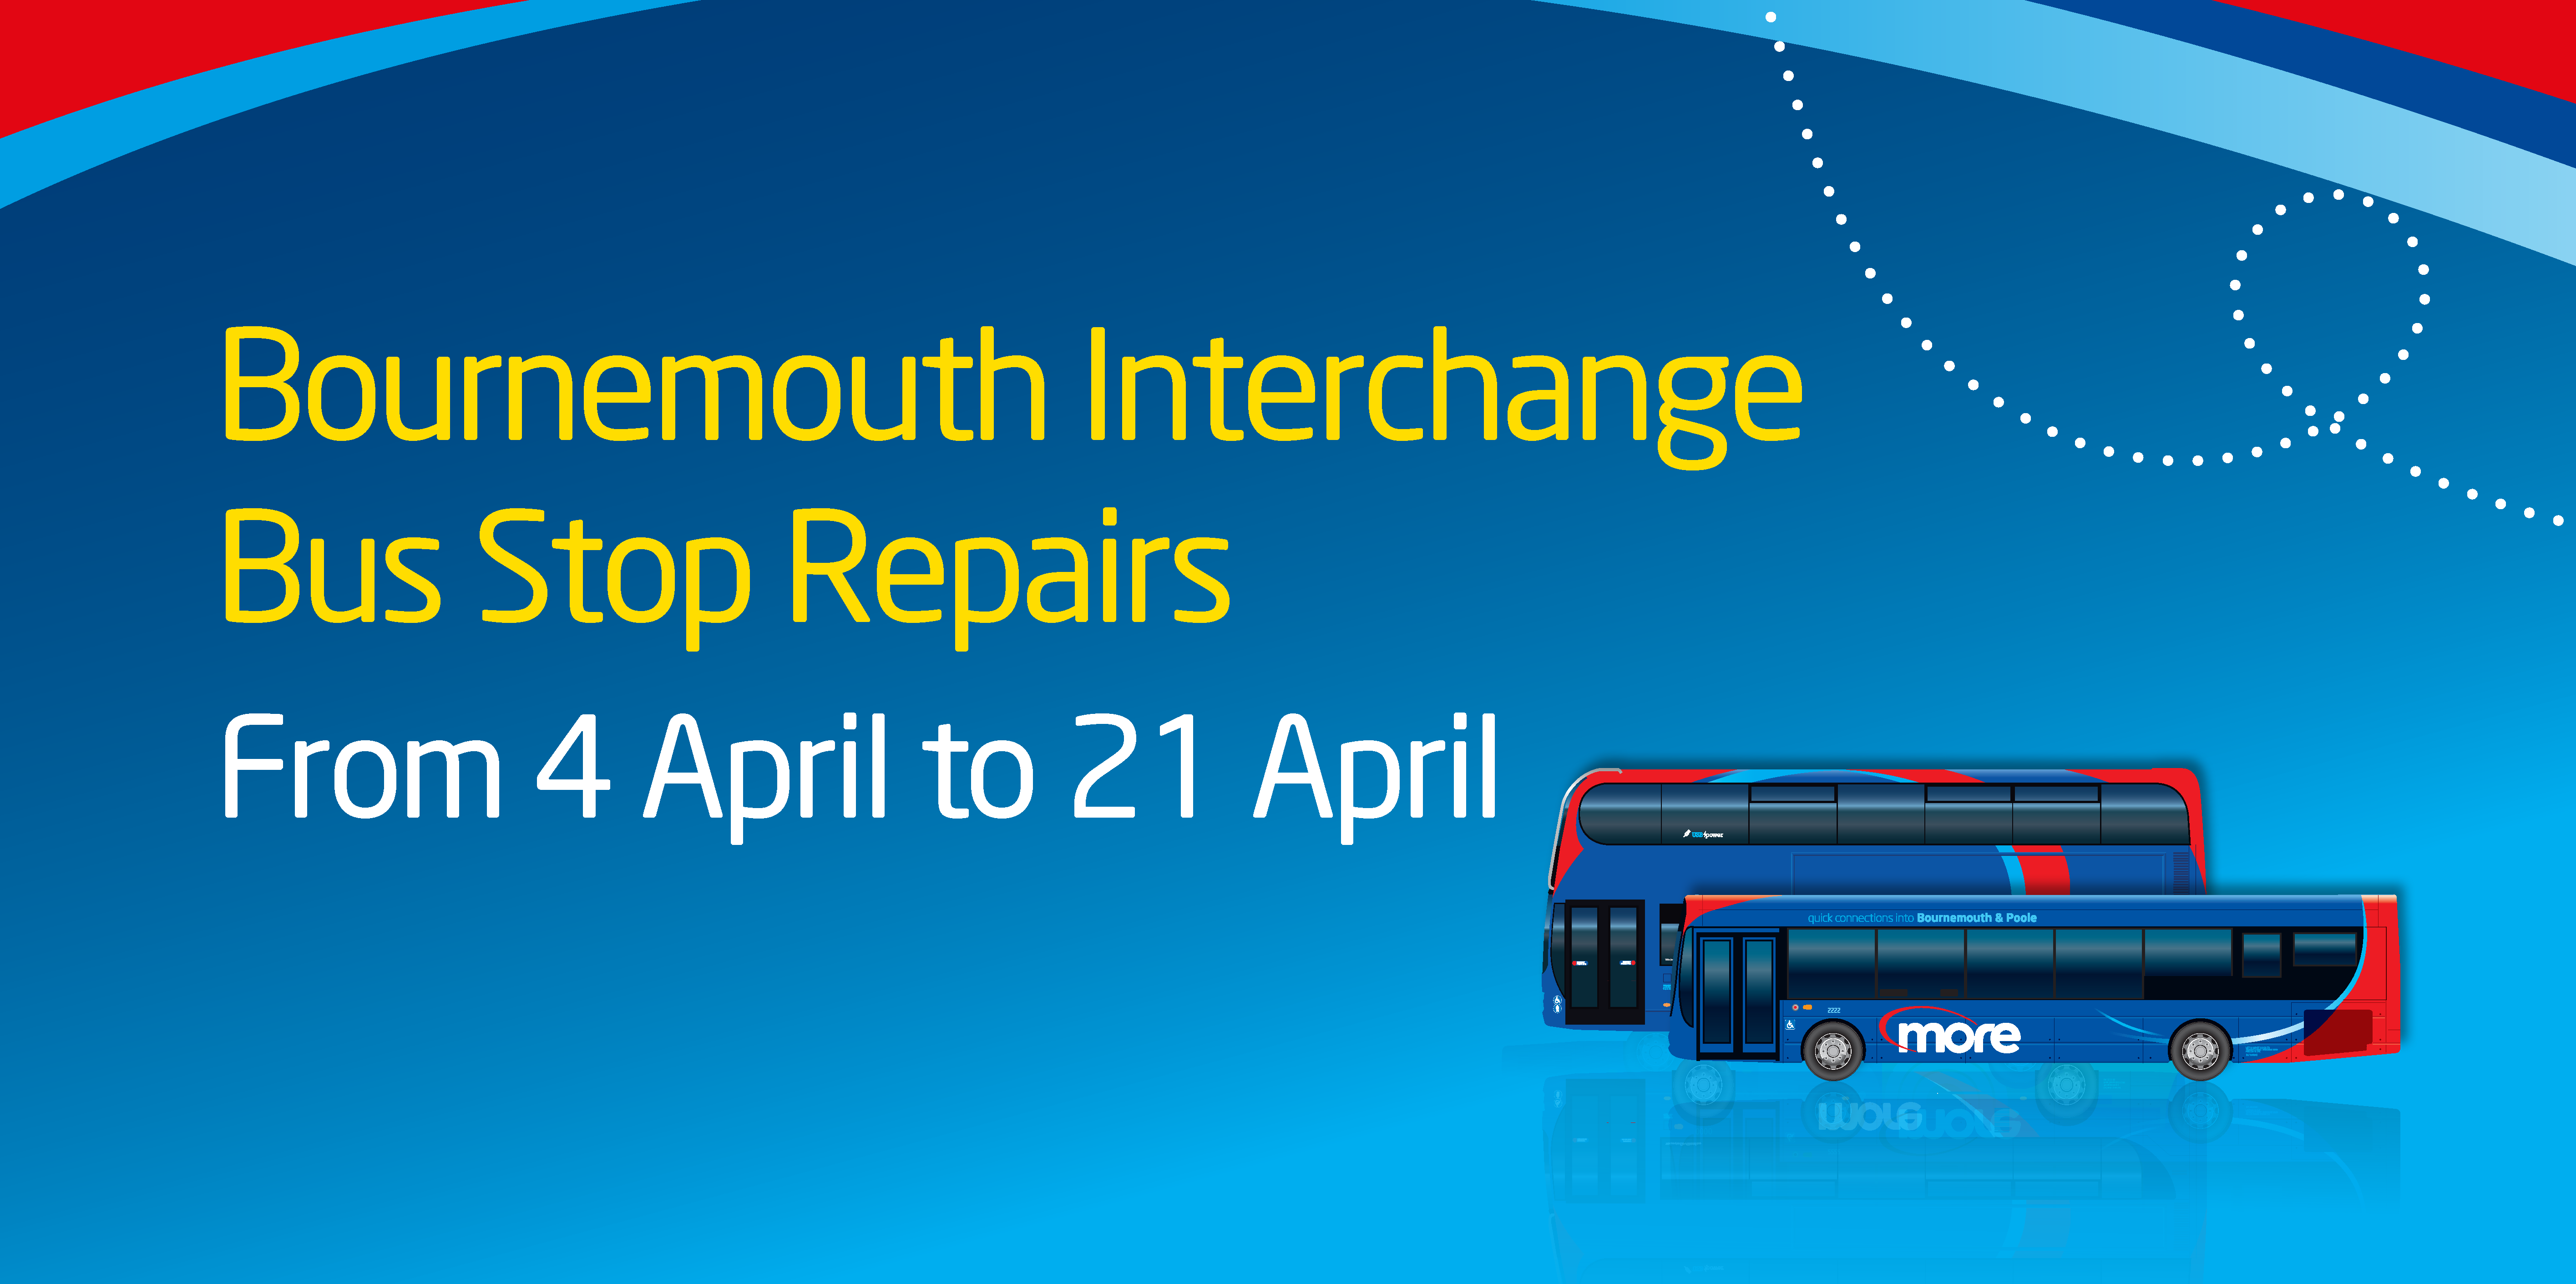 Bournemouth Interchange Bus Stop Repairs from 4th - 21st April